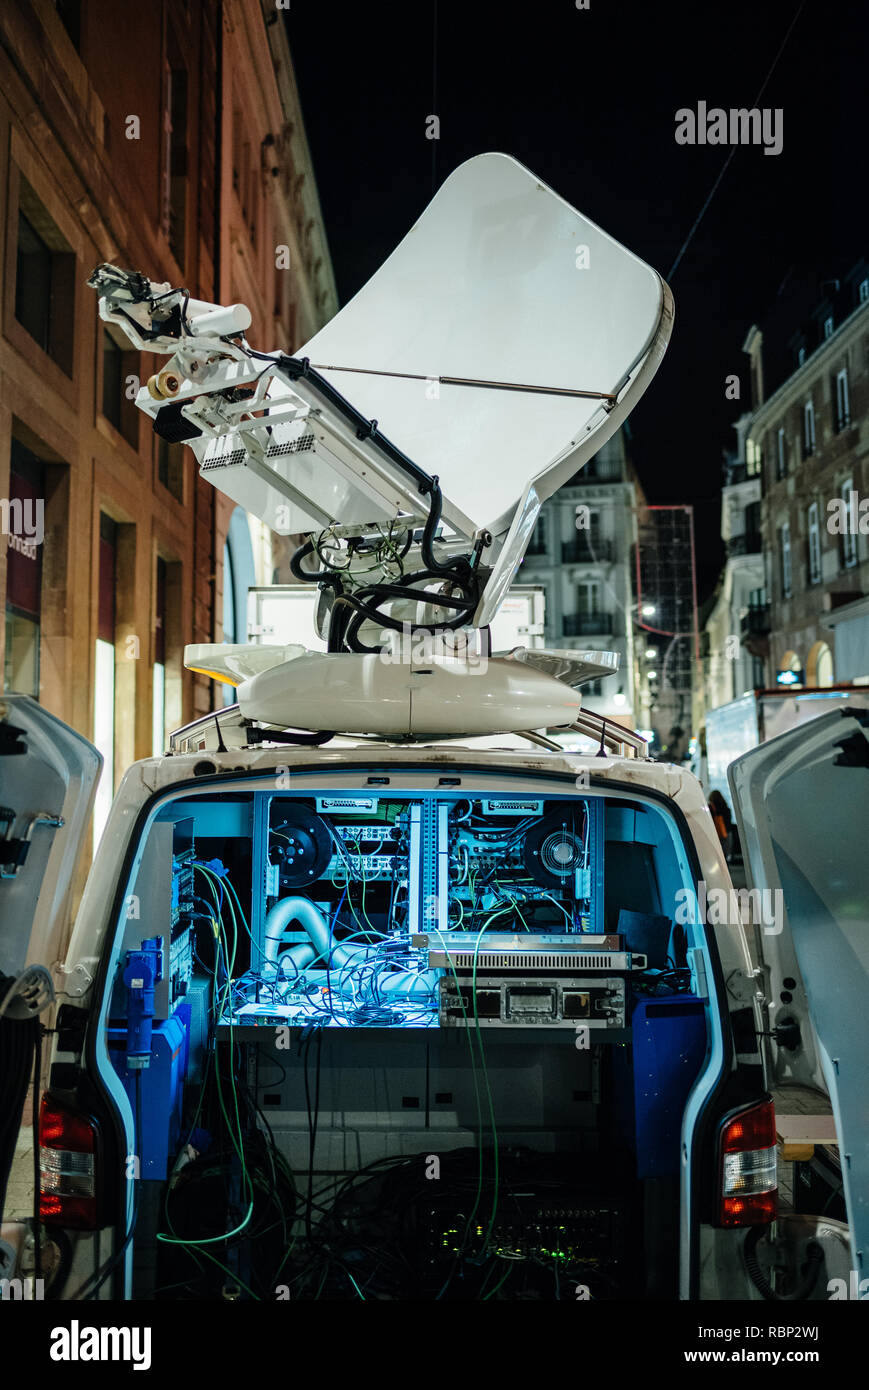 Opened door of parked satellite TV van transmitting breaking news events to satellites for broadcast around the world at night in city Stock Photo